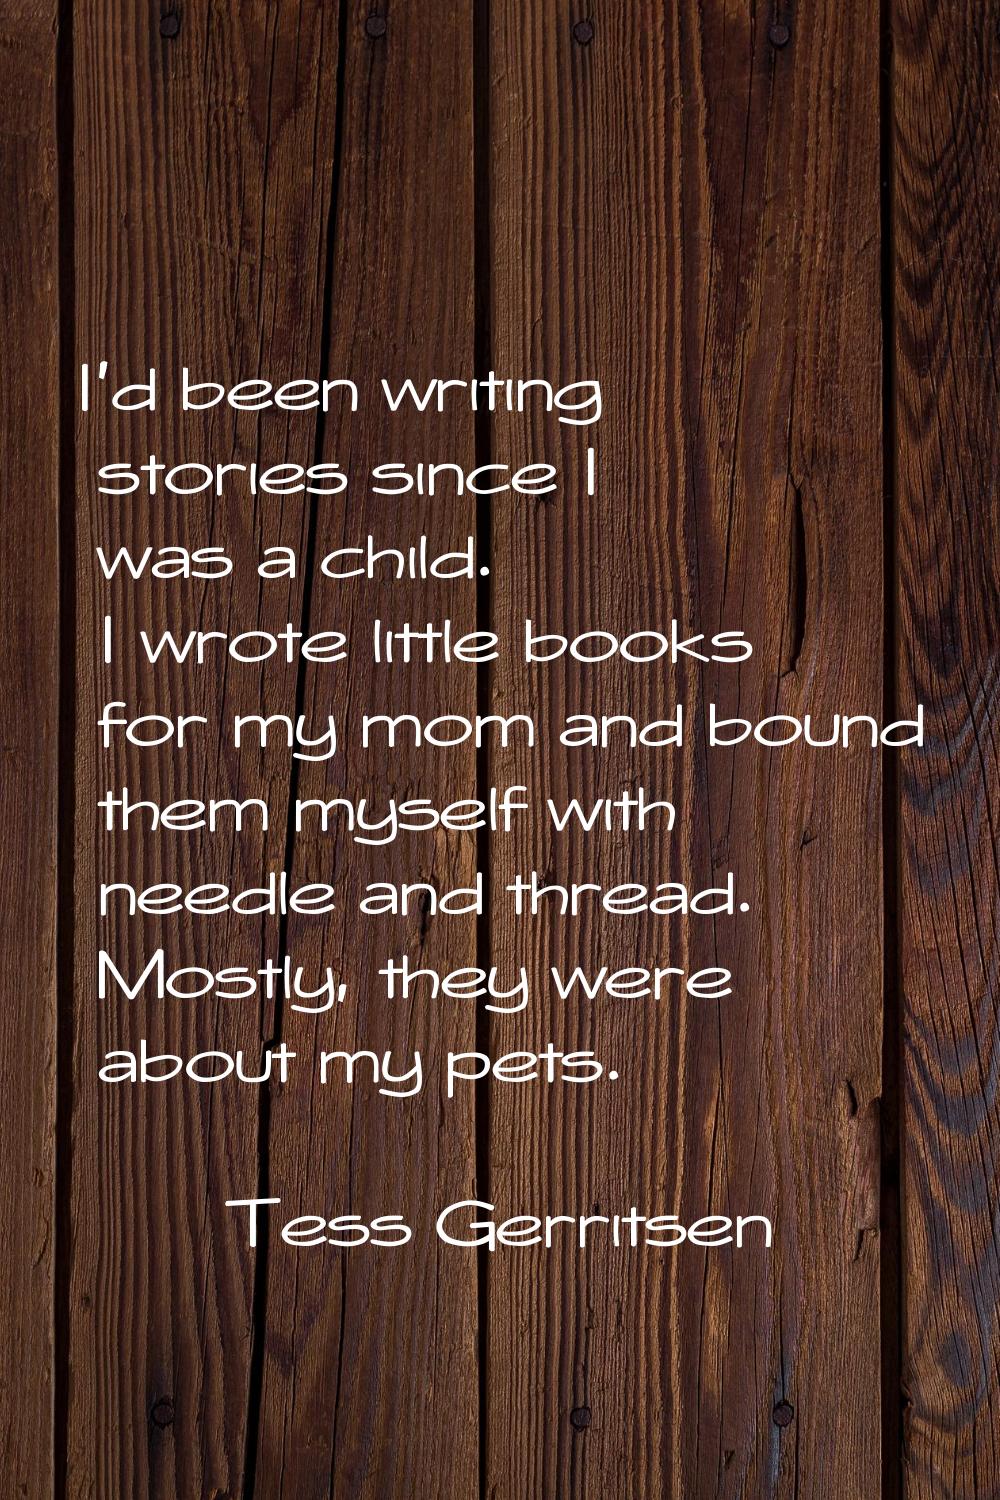 I'd been writing stories since I was a child. I wrote little books for my mom and bound them myself